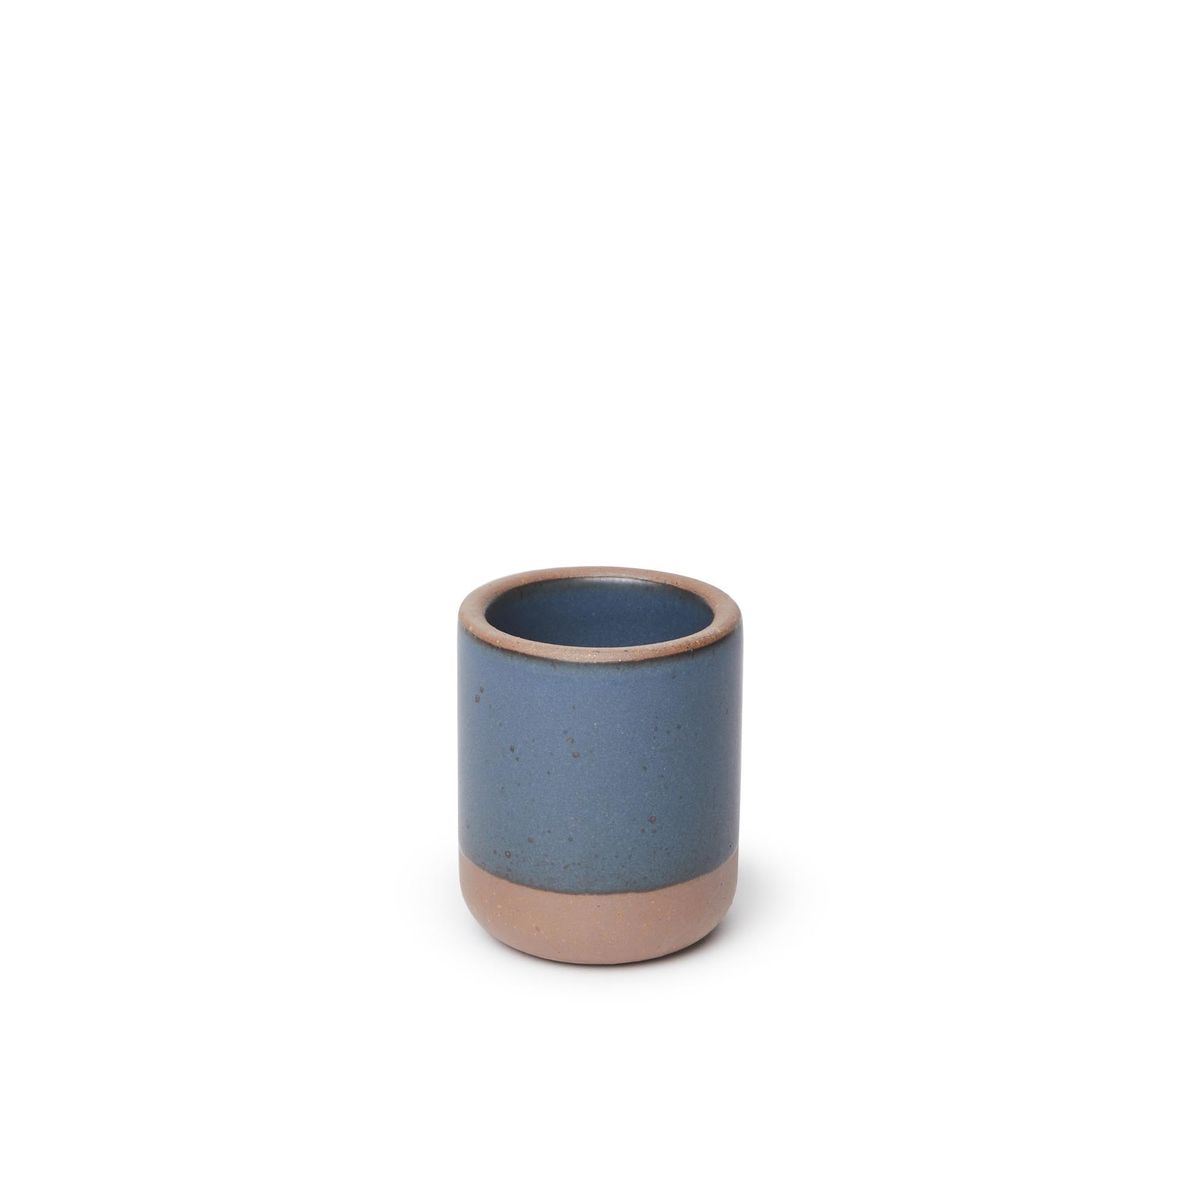 A small, short ceramic mug cup in a toned-down navy color featuring iron speckles and unglazed rim and bottom base.